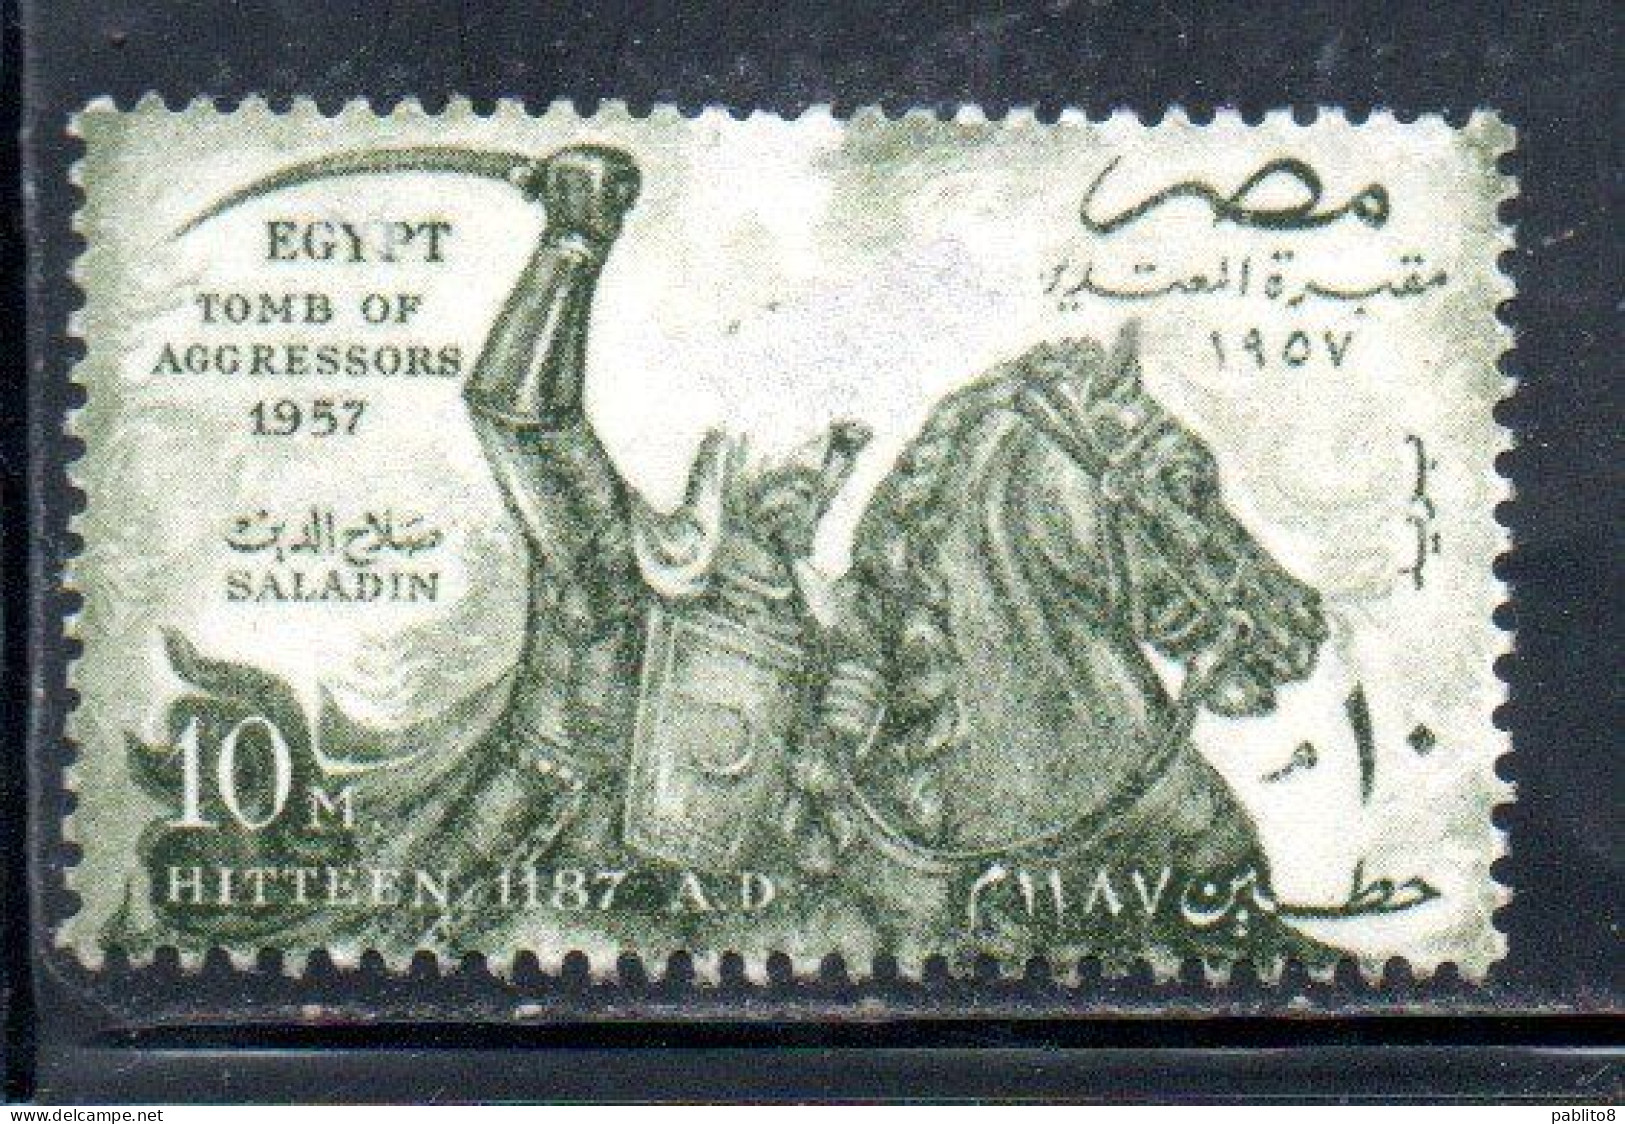 UAR EGYPT EGITTO 1957 TOMB OF AGGRESSORS 1957 SULTAN SALADIN HITTEEN 1187 A D 10m MNH - Unused Stamps